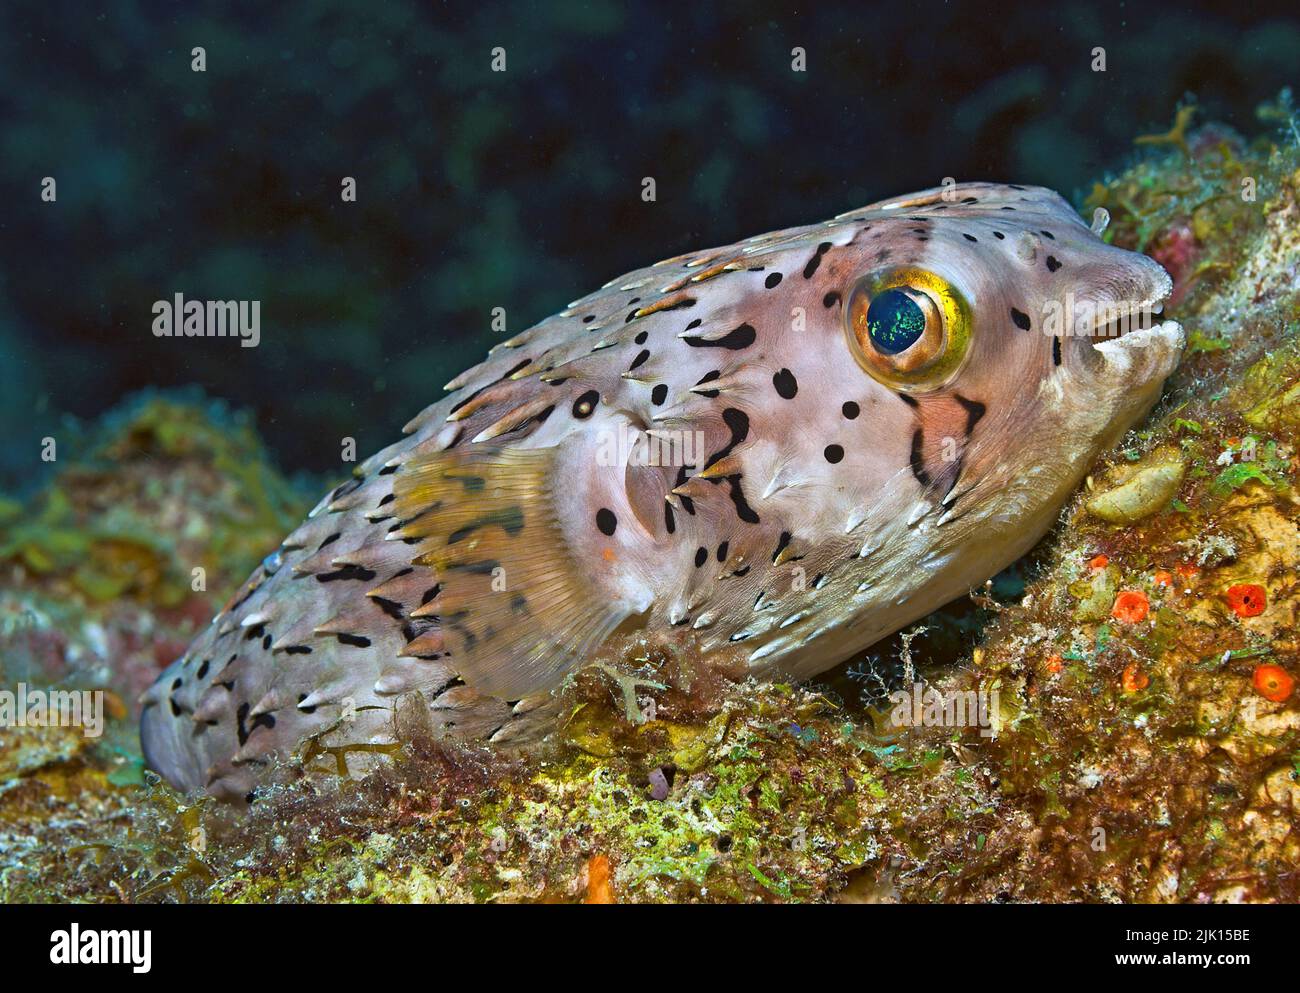 Balloonfish or Fine-spotted porcupinefish (Diodon holocanthus), by inflating the body, spines are erected, Roatan, Bay Islands, Honduras, Caribbean Stock Photo